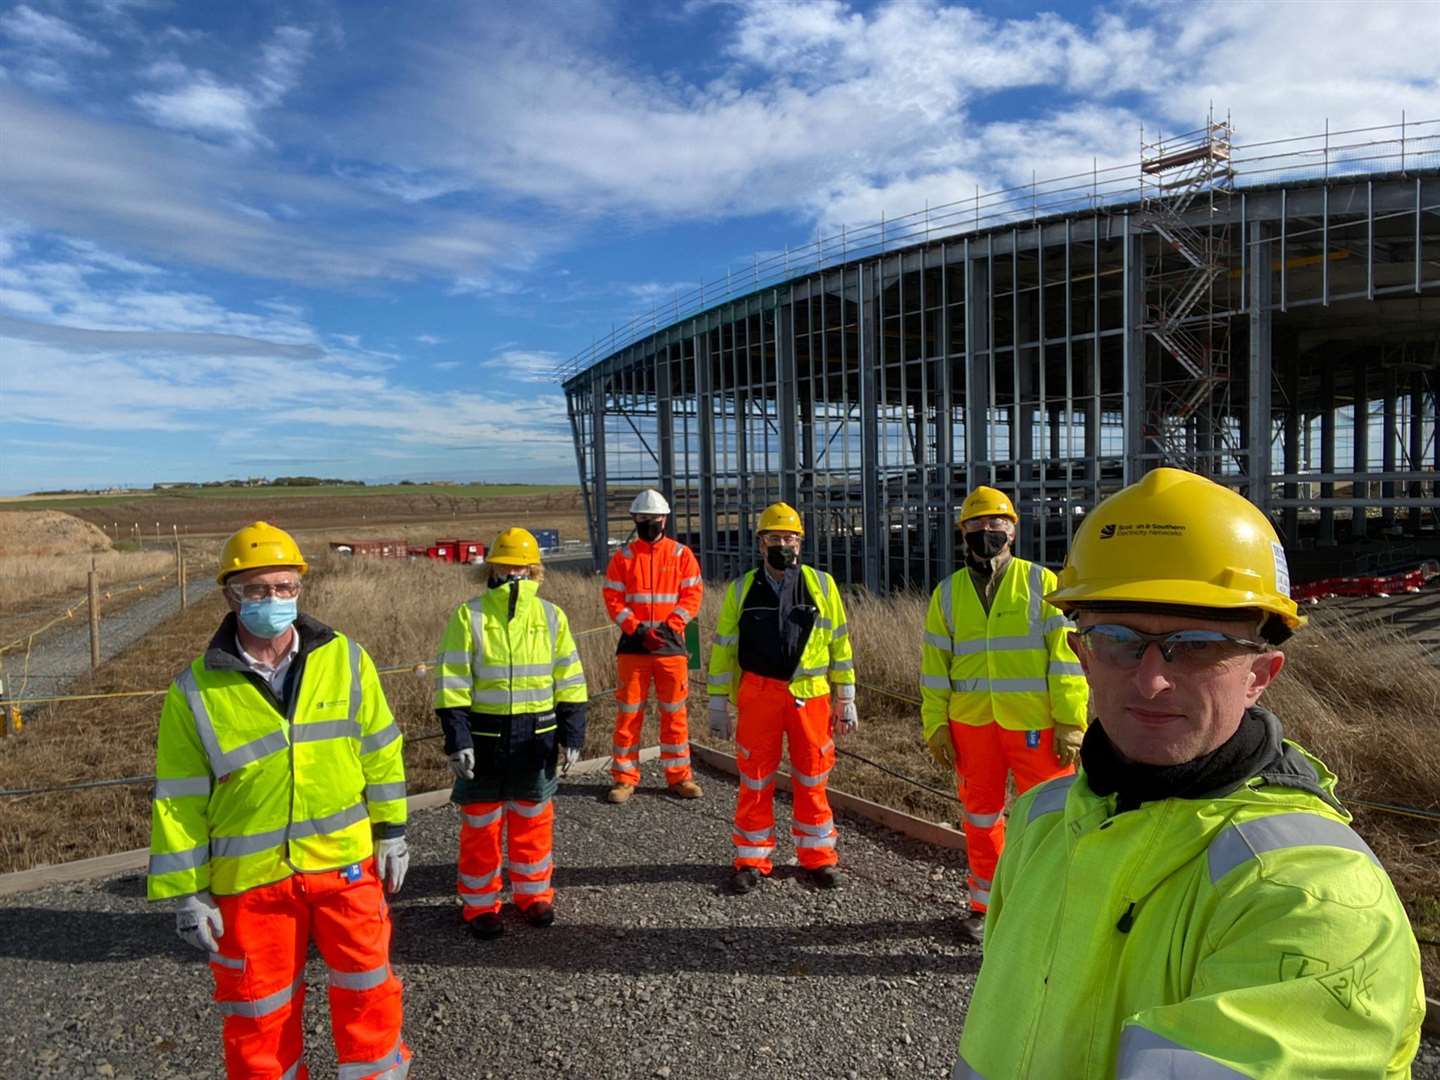 Members of the Royal Burgh of Wick Community Council visited the Noss Head switching station site and were given an update on how it is progressing.